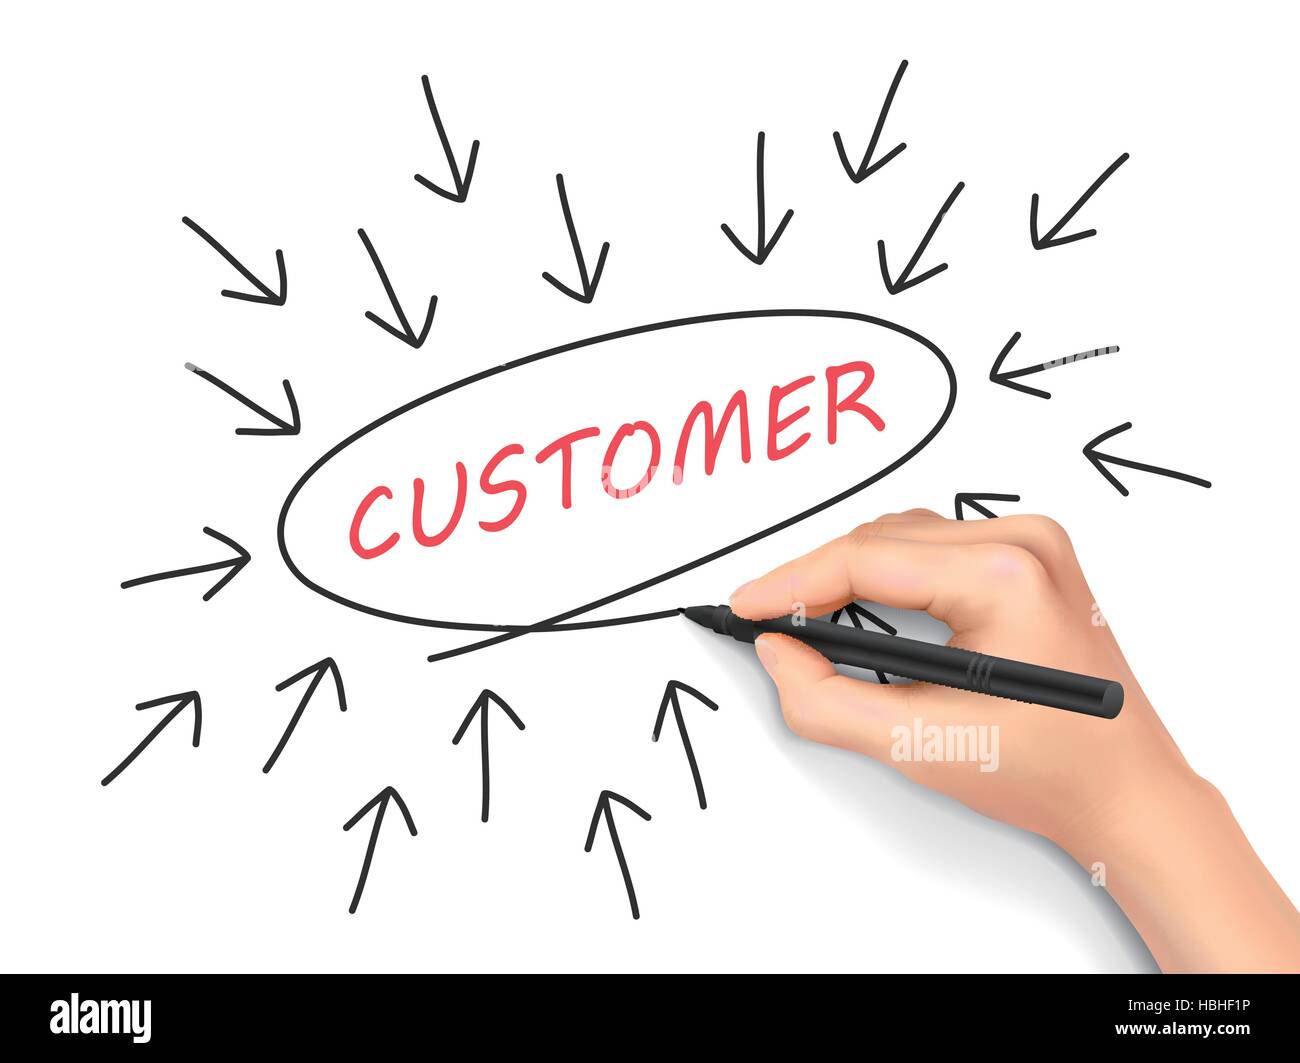 customer concept with arrows written by hand on white background Stock Vector